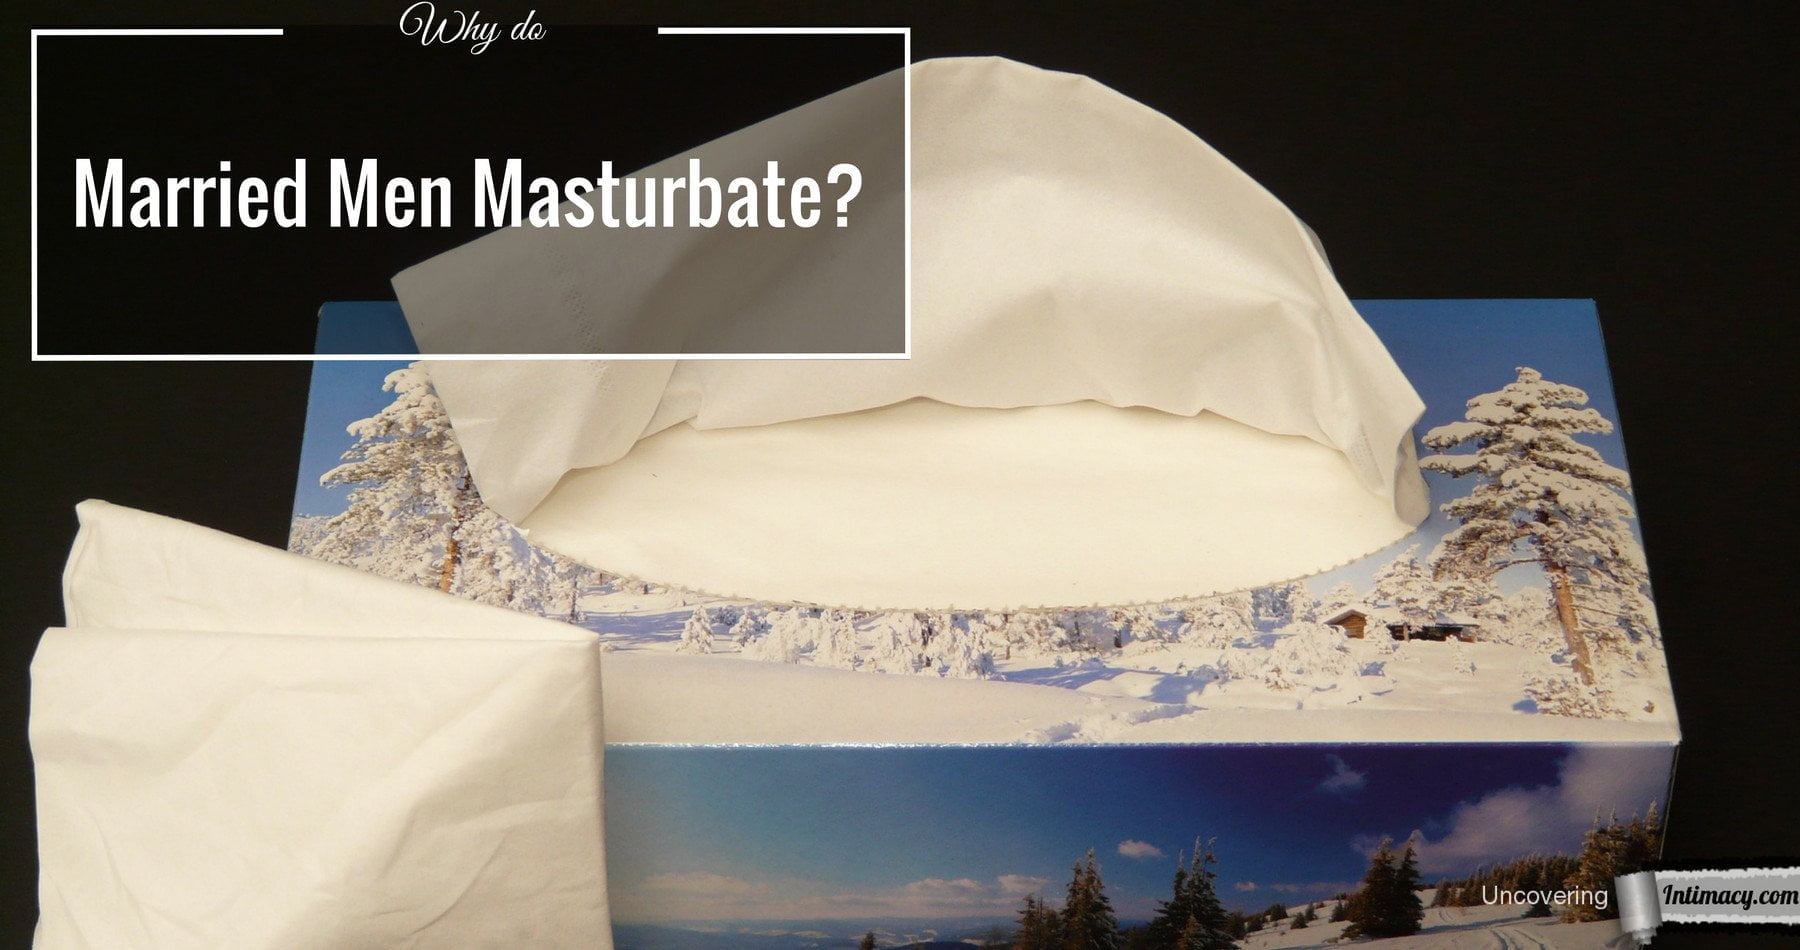 Why Do Married Men Masturbate? - Uncovering Intimacy